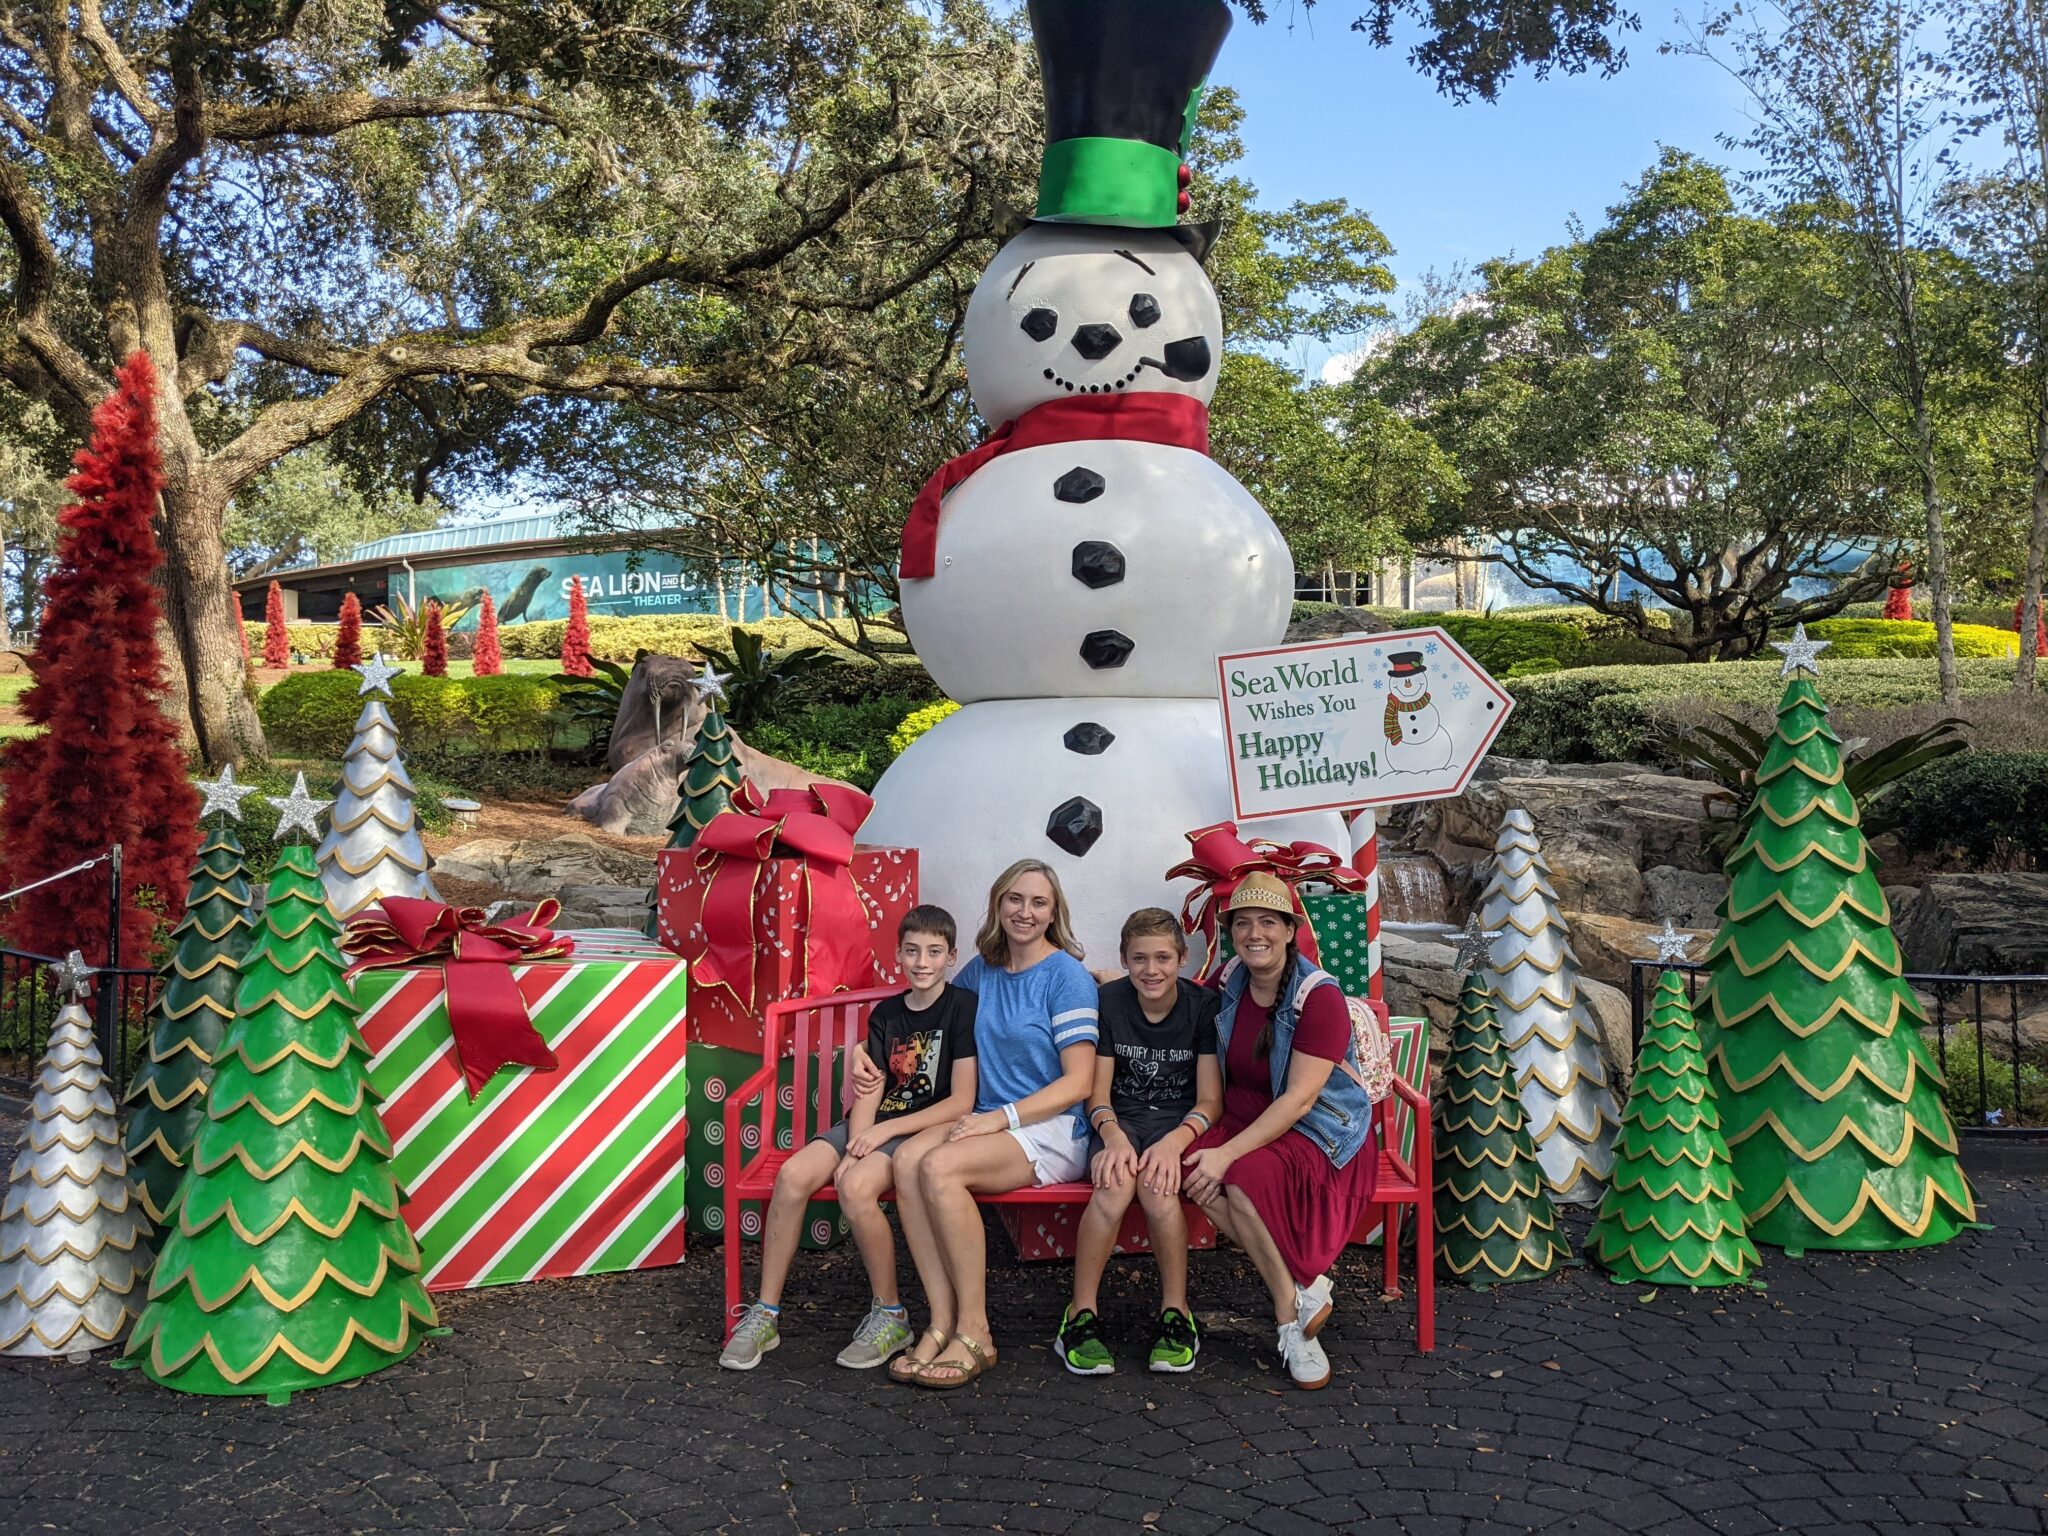 What to See and Do at the SeaWorld Orlando Christmas Celebration All Things with Purpose Sarah Lemp 12